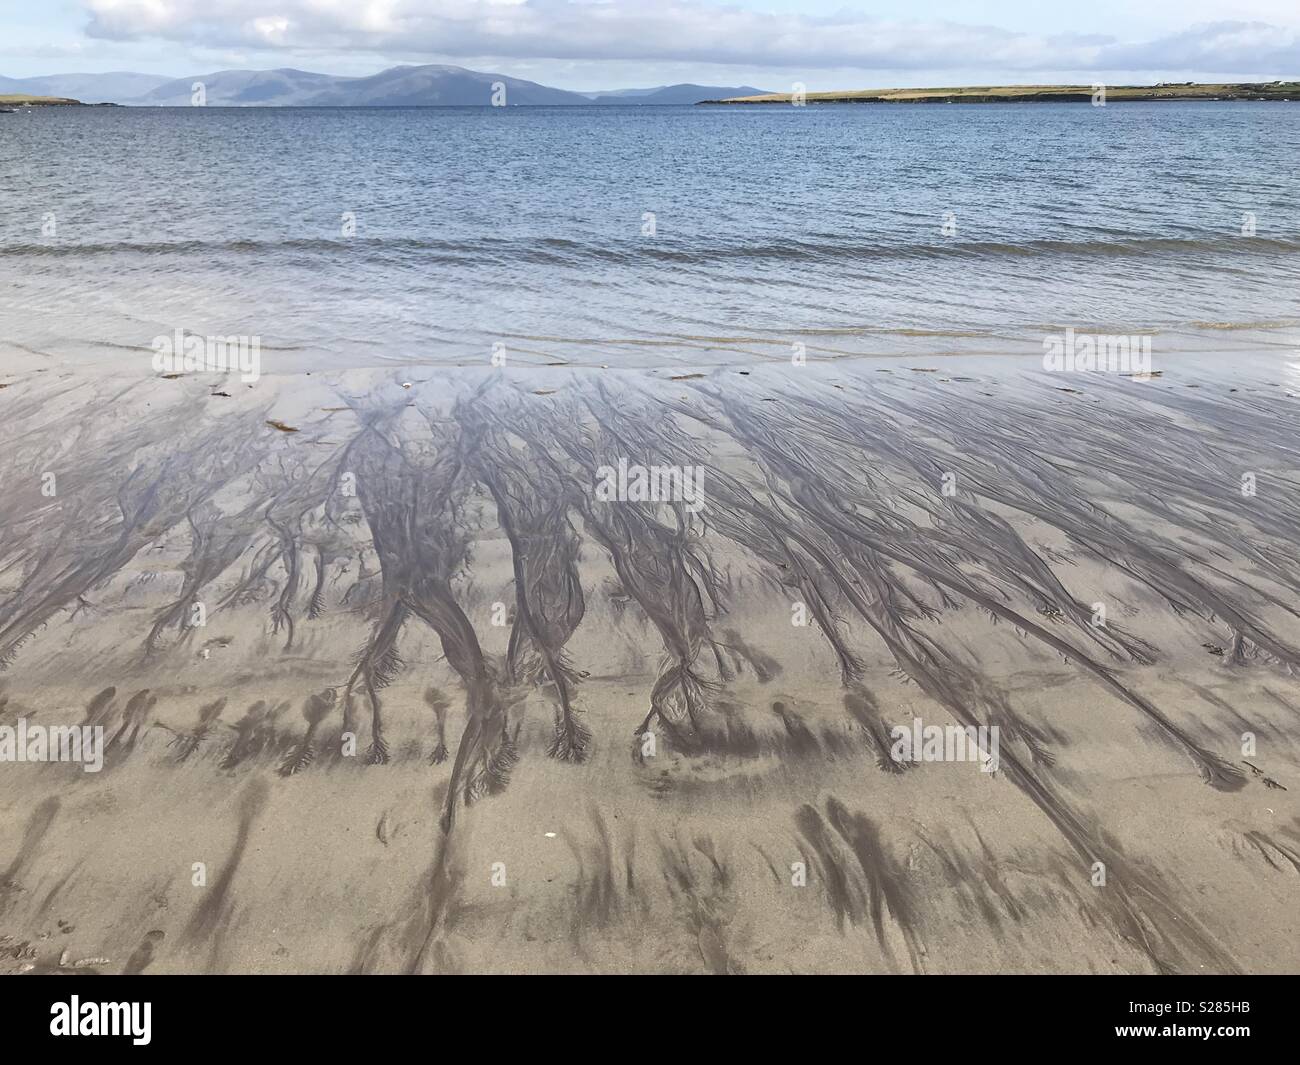 Dramatic pattern of rivulets created by receding tide Stock Photo